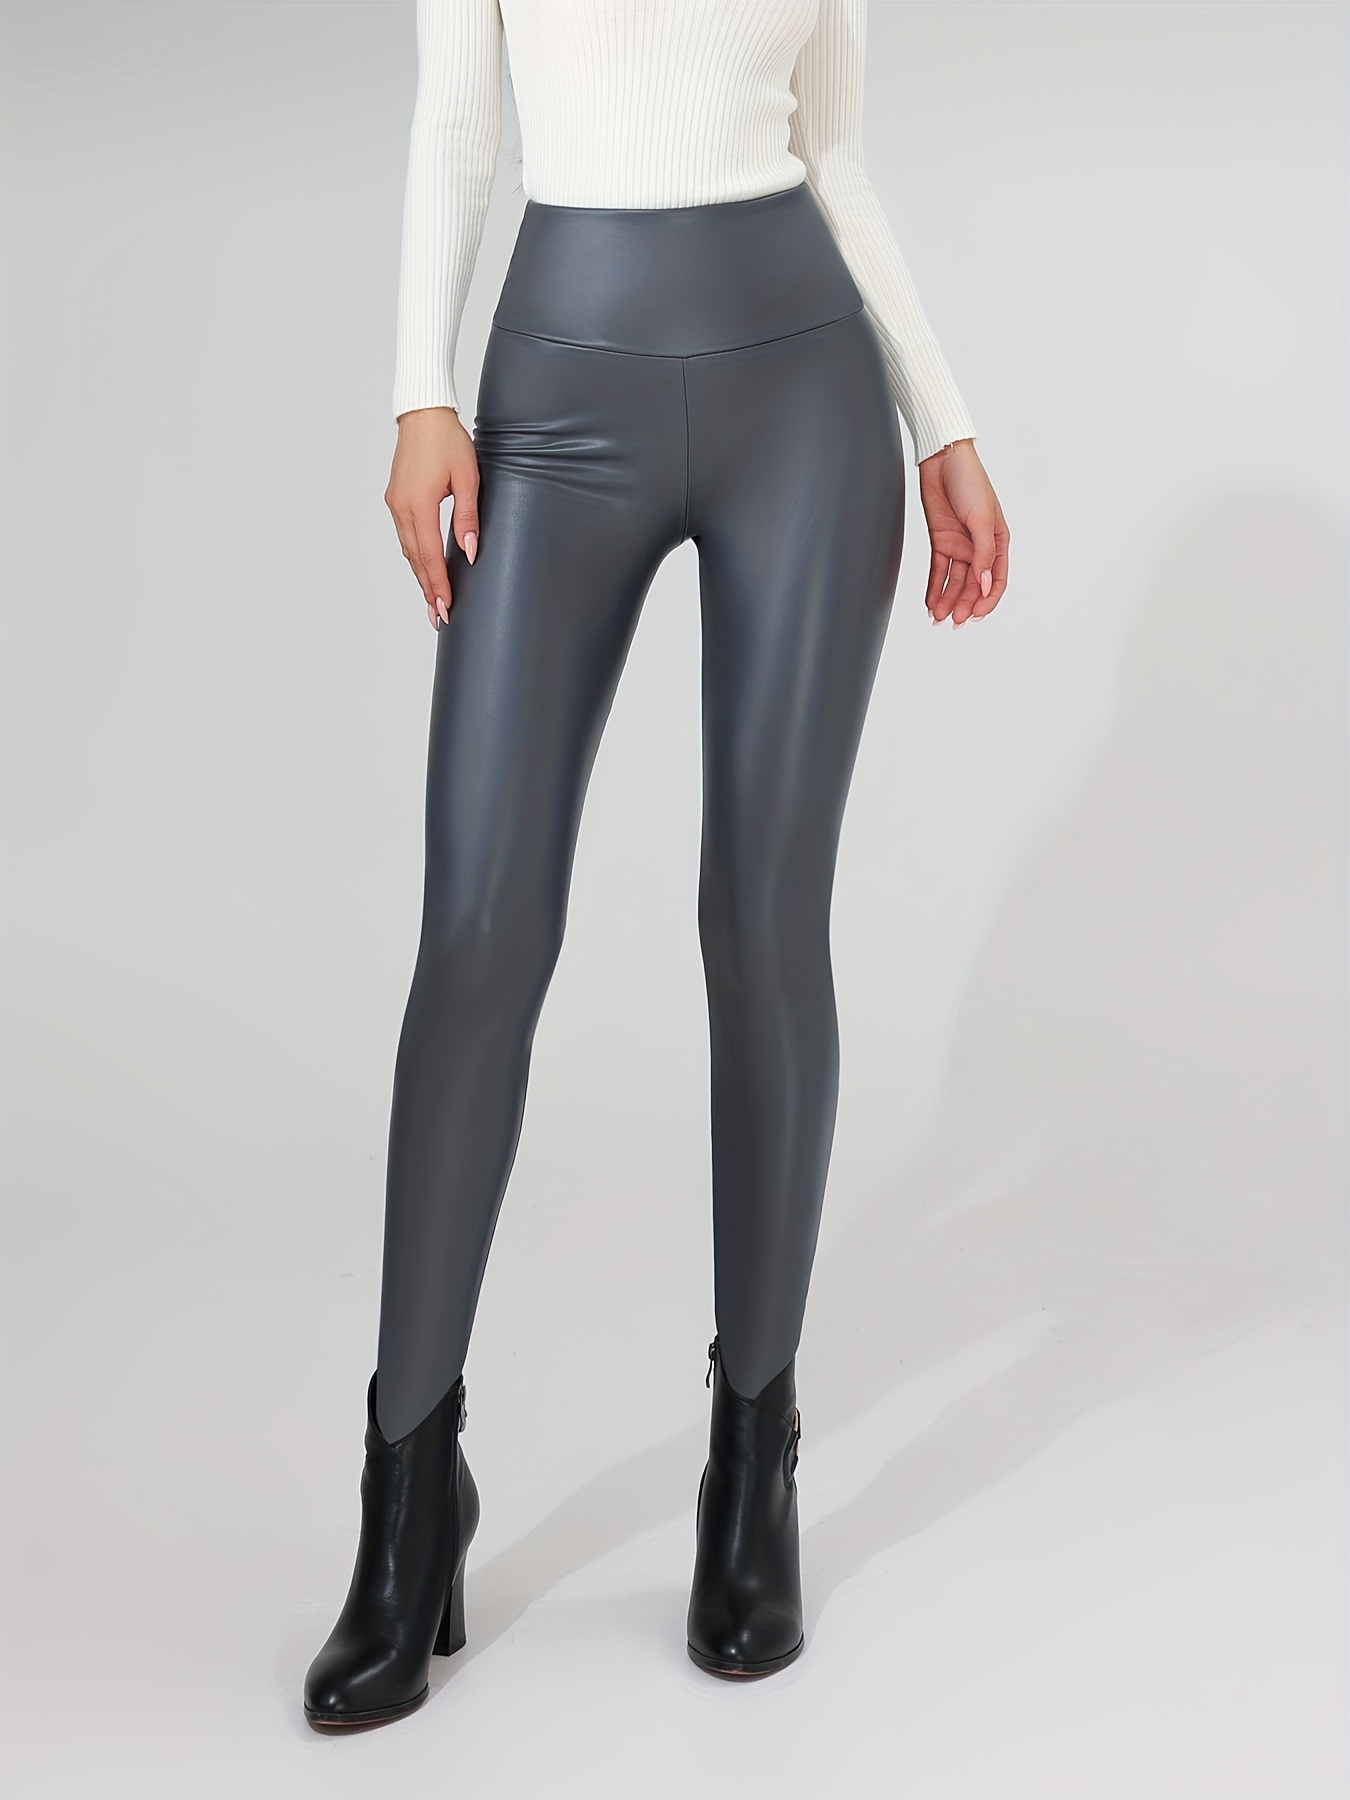 Lady Thermal Faux Leather Pants Leggings Stretch Skinny High Waist Warm